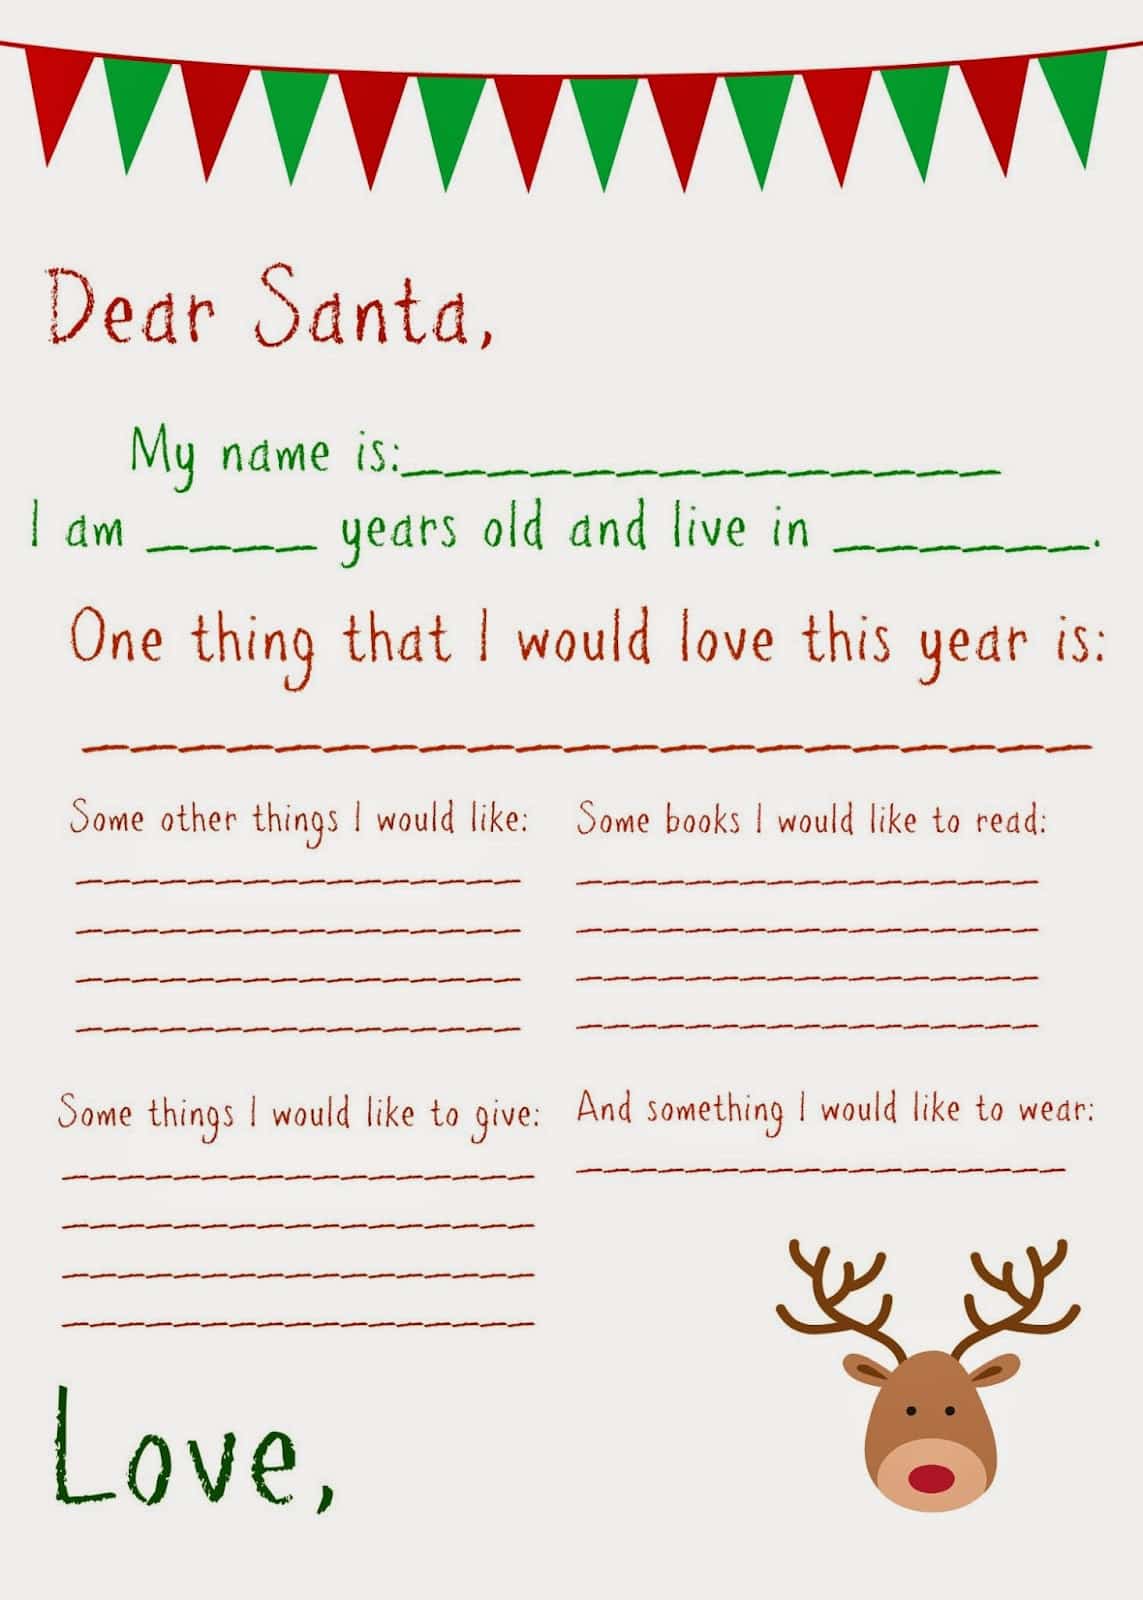 Dear Santa Letter (Free Printable) - The Chirping Moms Regarding Free Printable Letter From Santa Template